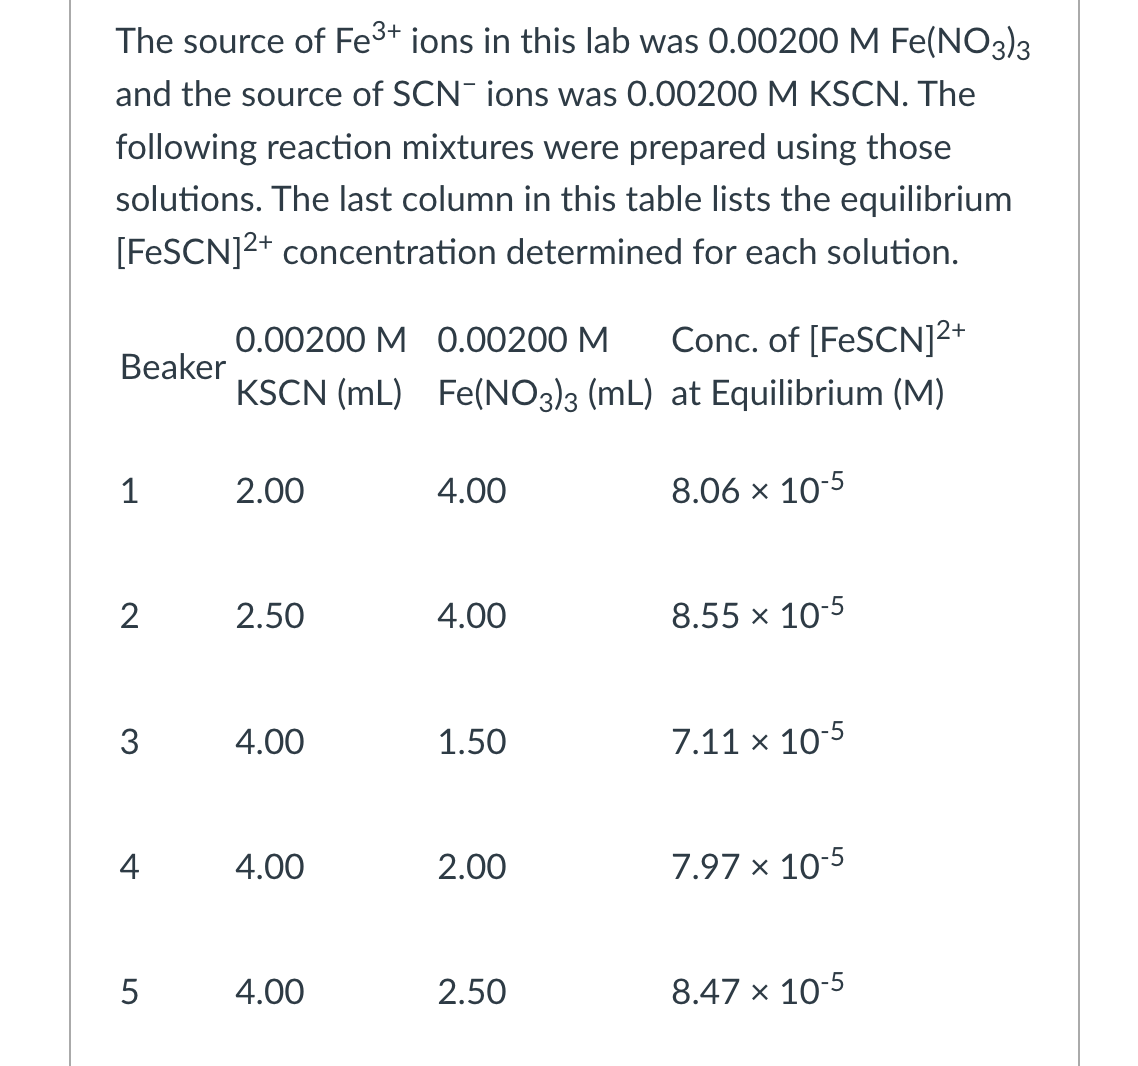 The source of Fe³+ ions in this lab was 0.00200 M Fe(NO3)3
and the source of SCN ions was 0.00200 M KSCN. The
following reaction mixtures were prepared using those
solutions. The last column in this table lists the equilibrium
[FeSCN]2+ concentration determined for each solution.
Beaker
1
2
3
4
5
0.00200 M 0.00200 M Conc. of [FeSCN]²+
KSCN (mL) Fe(NO3)3 (mL) at Equilibrium (M)
2.00
2.50
4.00
4.00
4.00
4.00
4.00
1.50
2.00
2.50
8.06 x 10-5
8.55 × 10-5
7.11 × 10-5
7.97 x 10-5
8.47 x 10-5